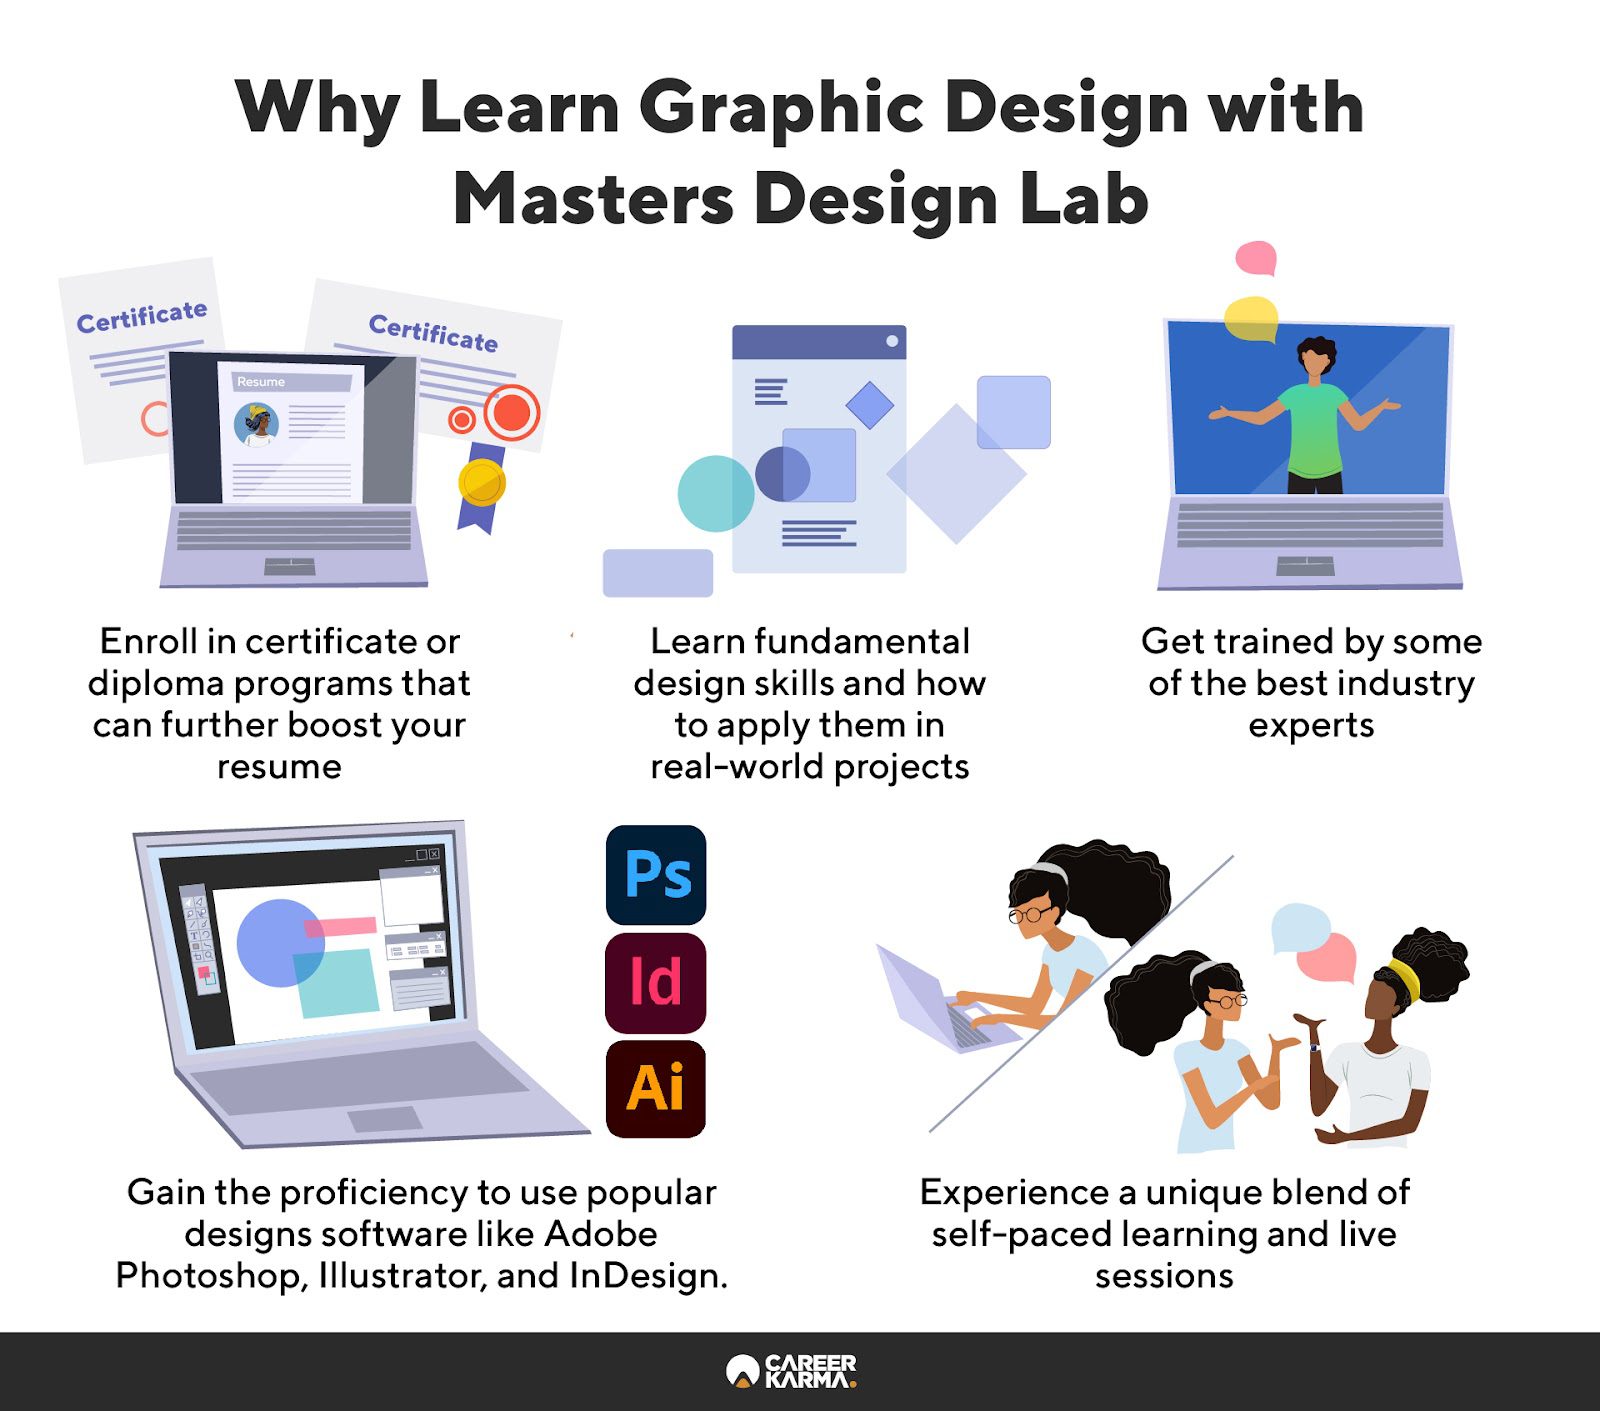 An infographic highlighting the top reasons why you should learn graphic design at Masters Design Lab